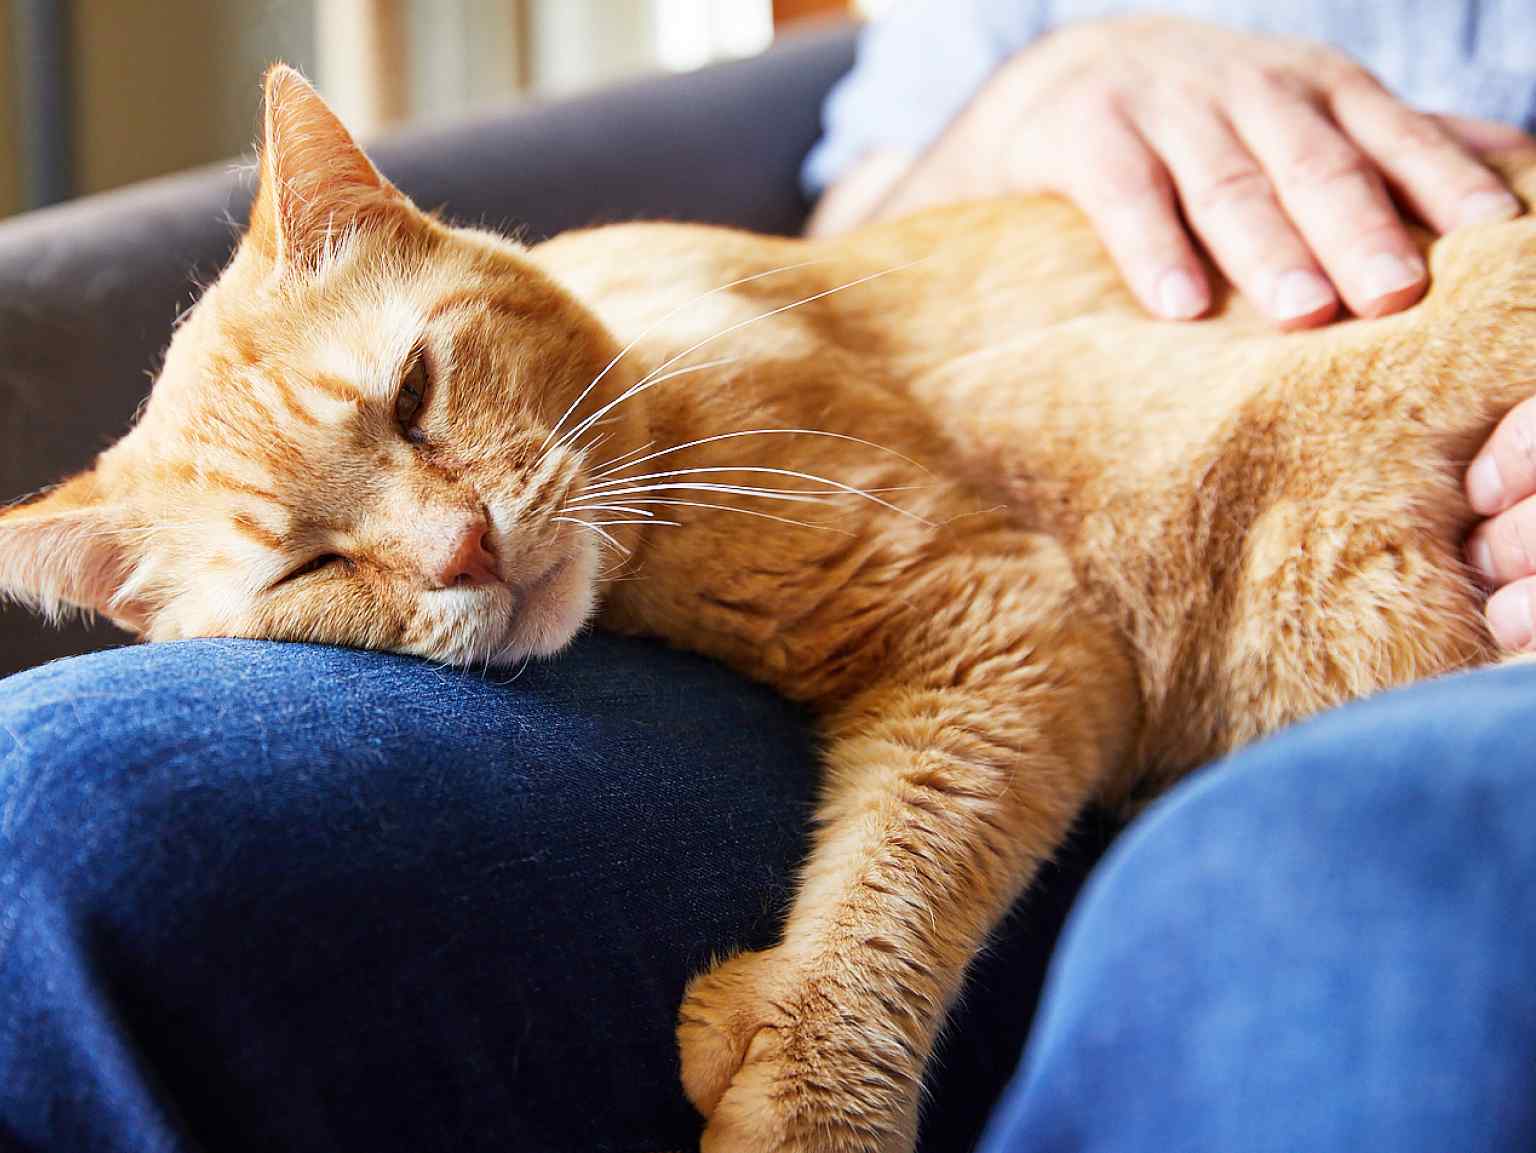 A close-up of a cat sleeping on his owner's lap